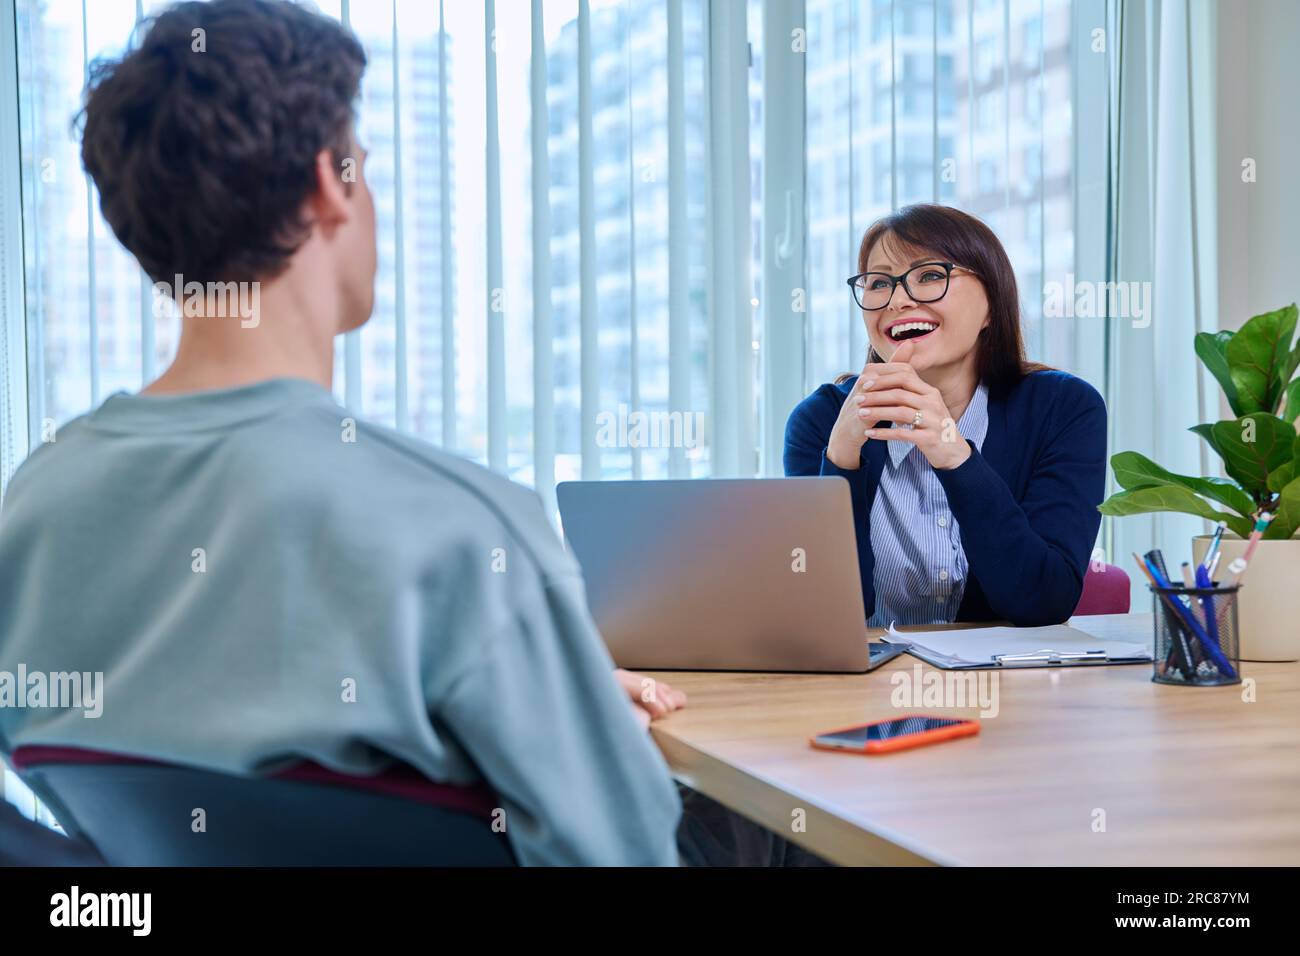 School psychologist supporting guy student, sitting in office of educational building Stock Photo